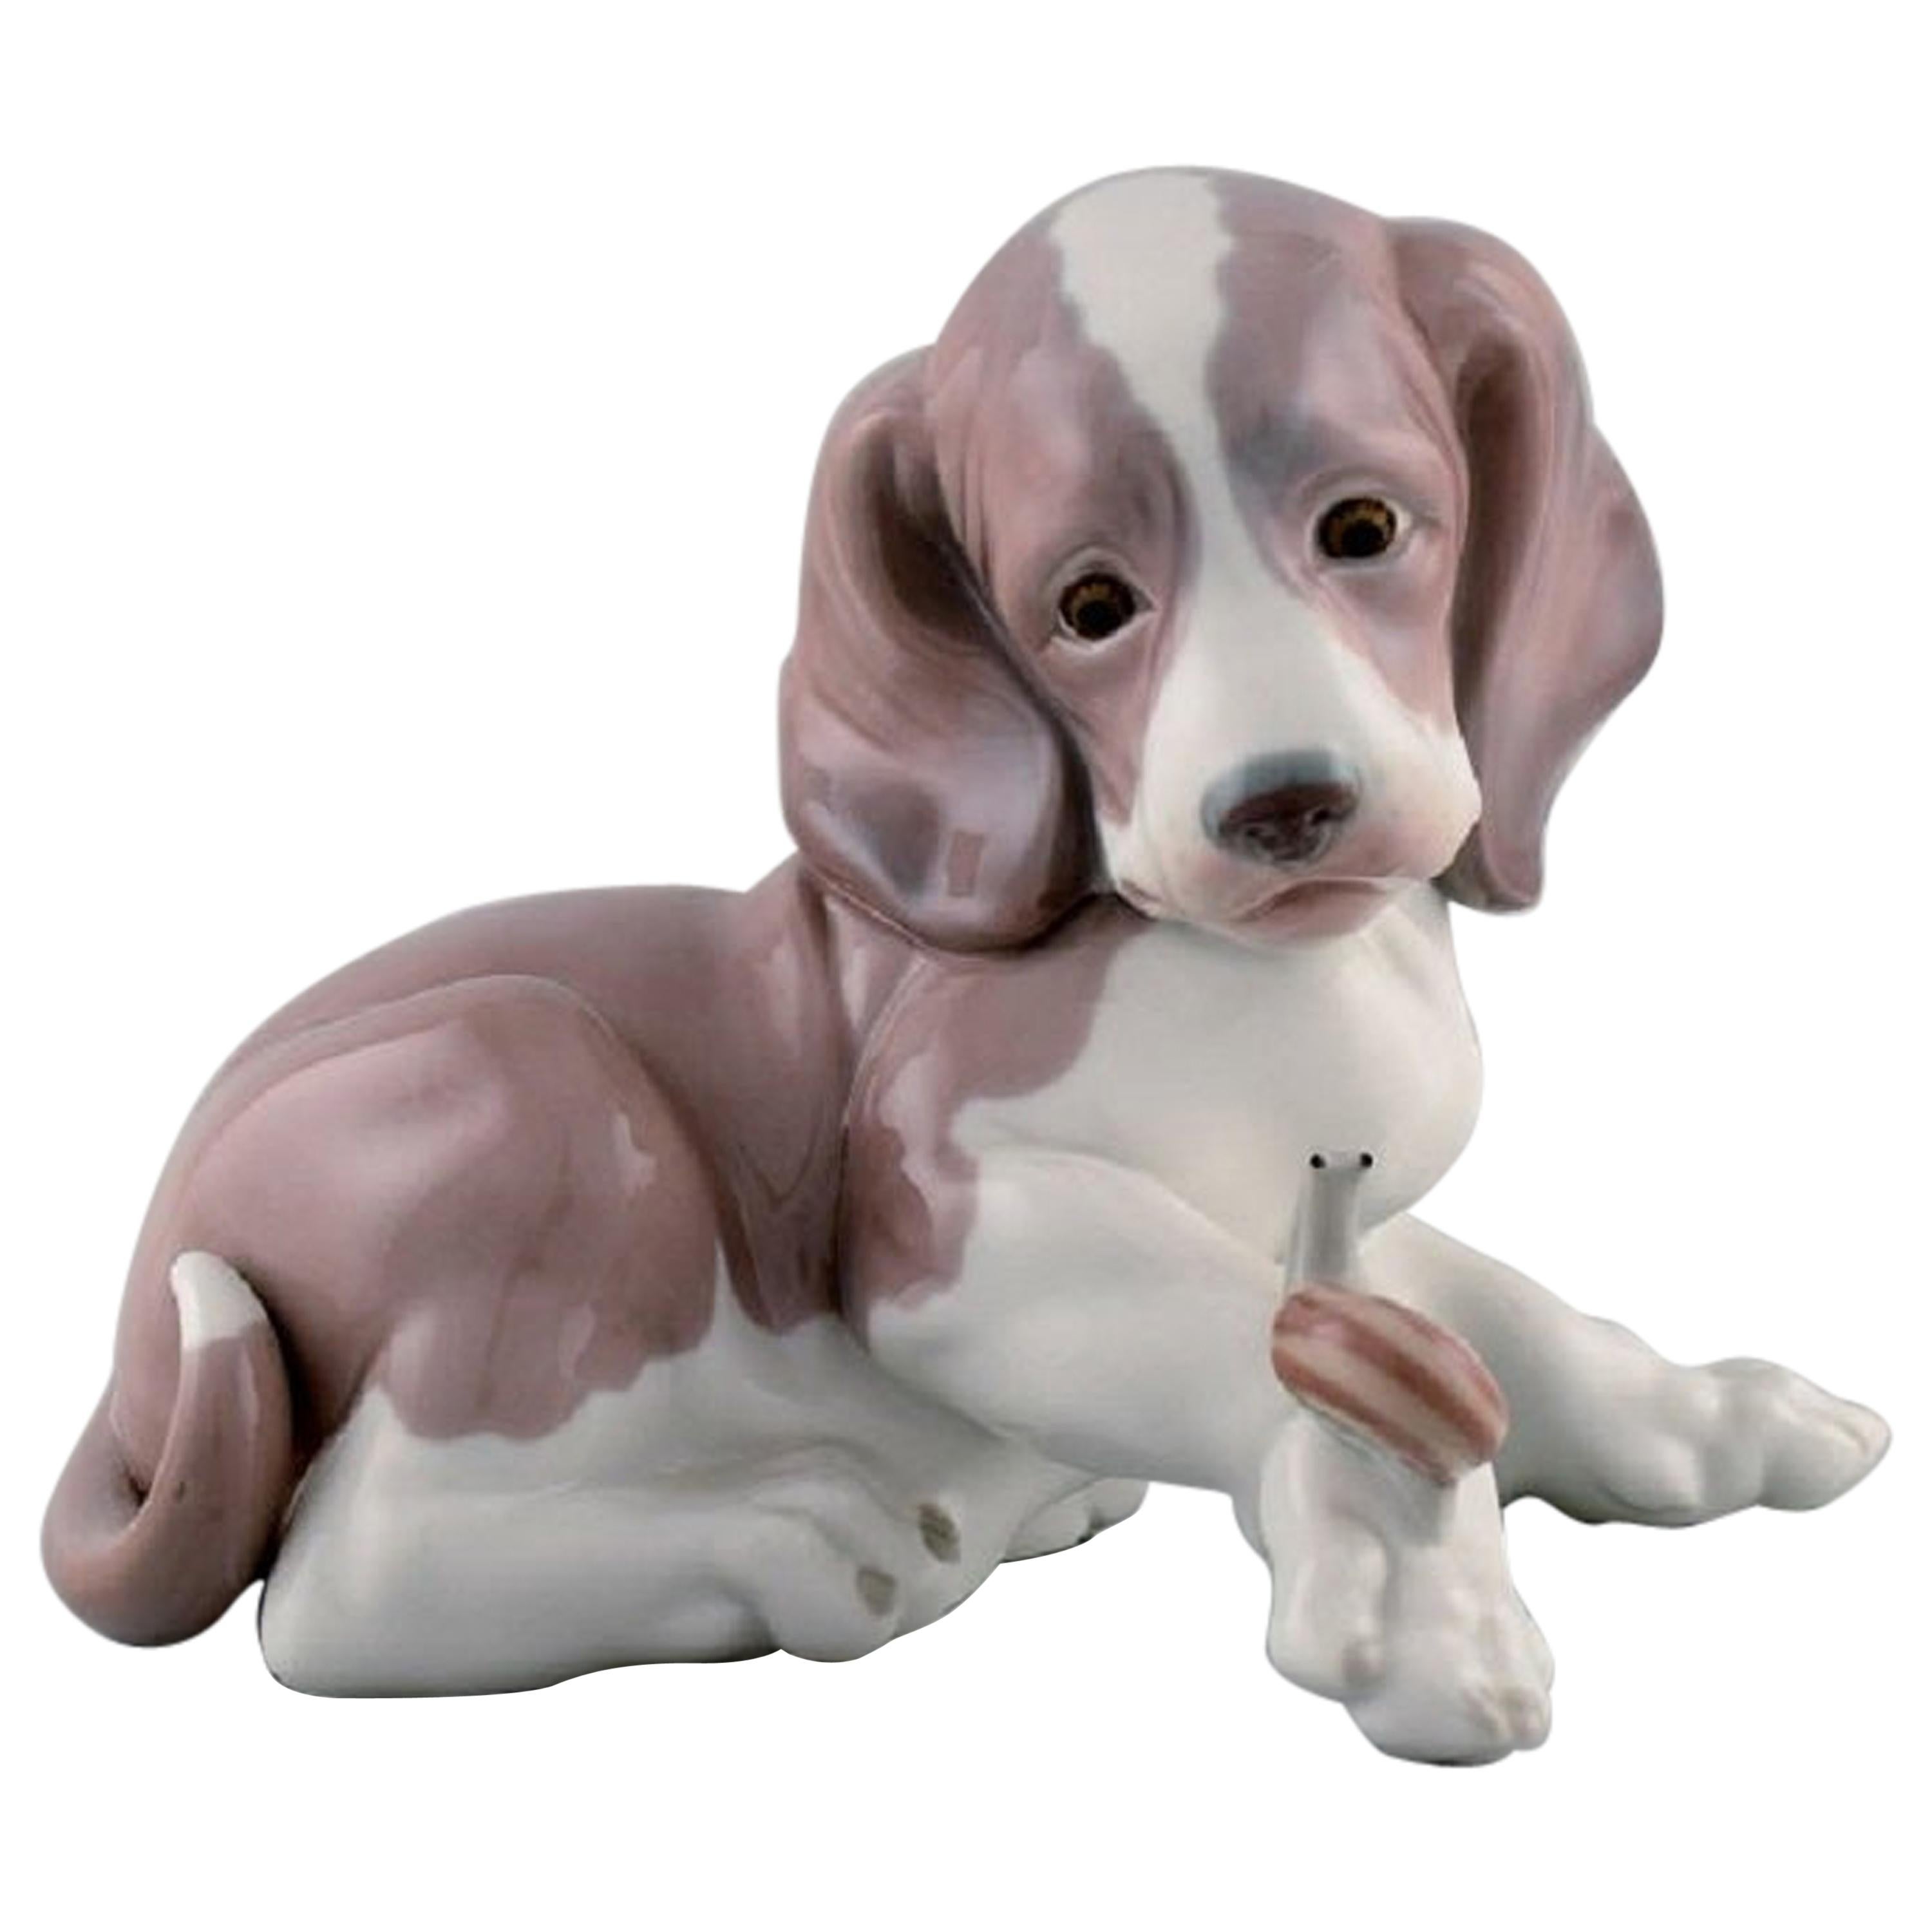 Lladro, Spain, Figure in Glazed Porcelain, Puppy and Snail, 1980s